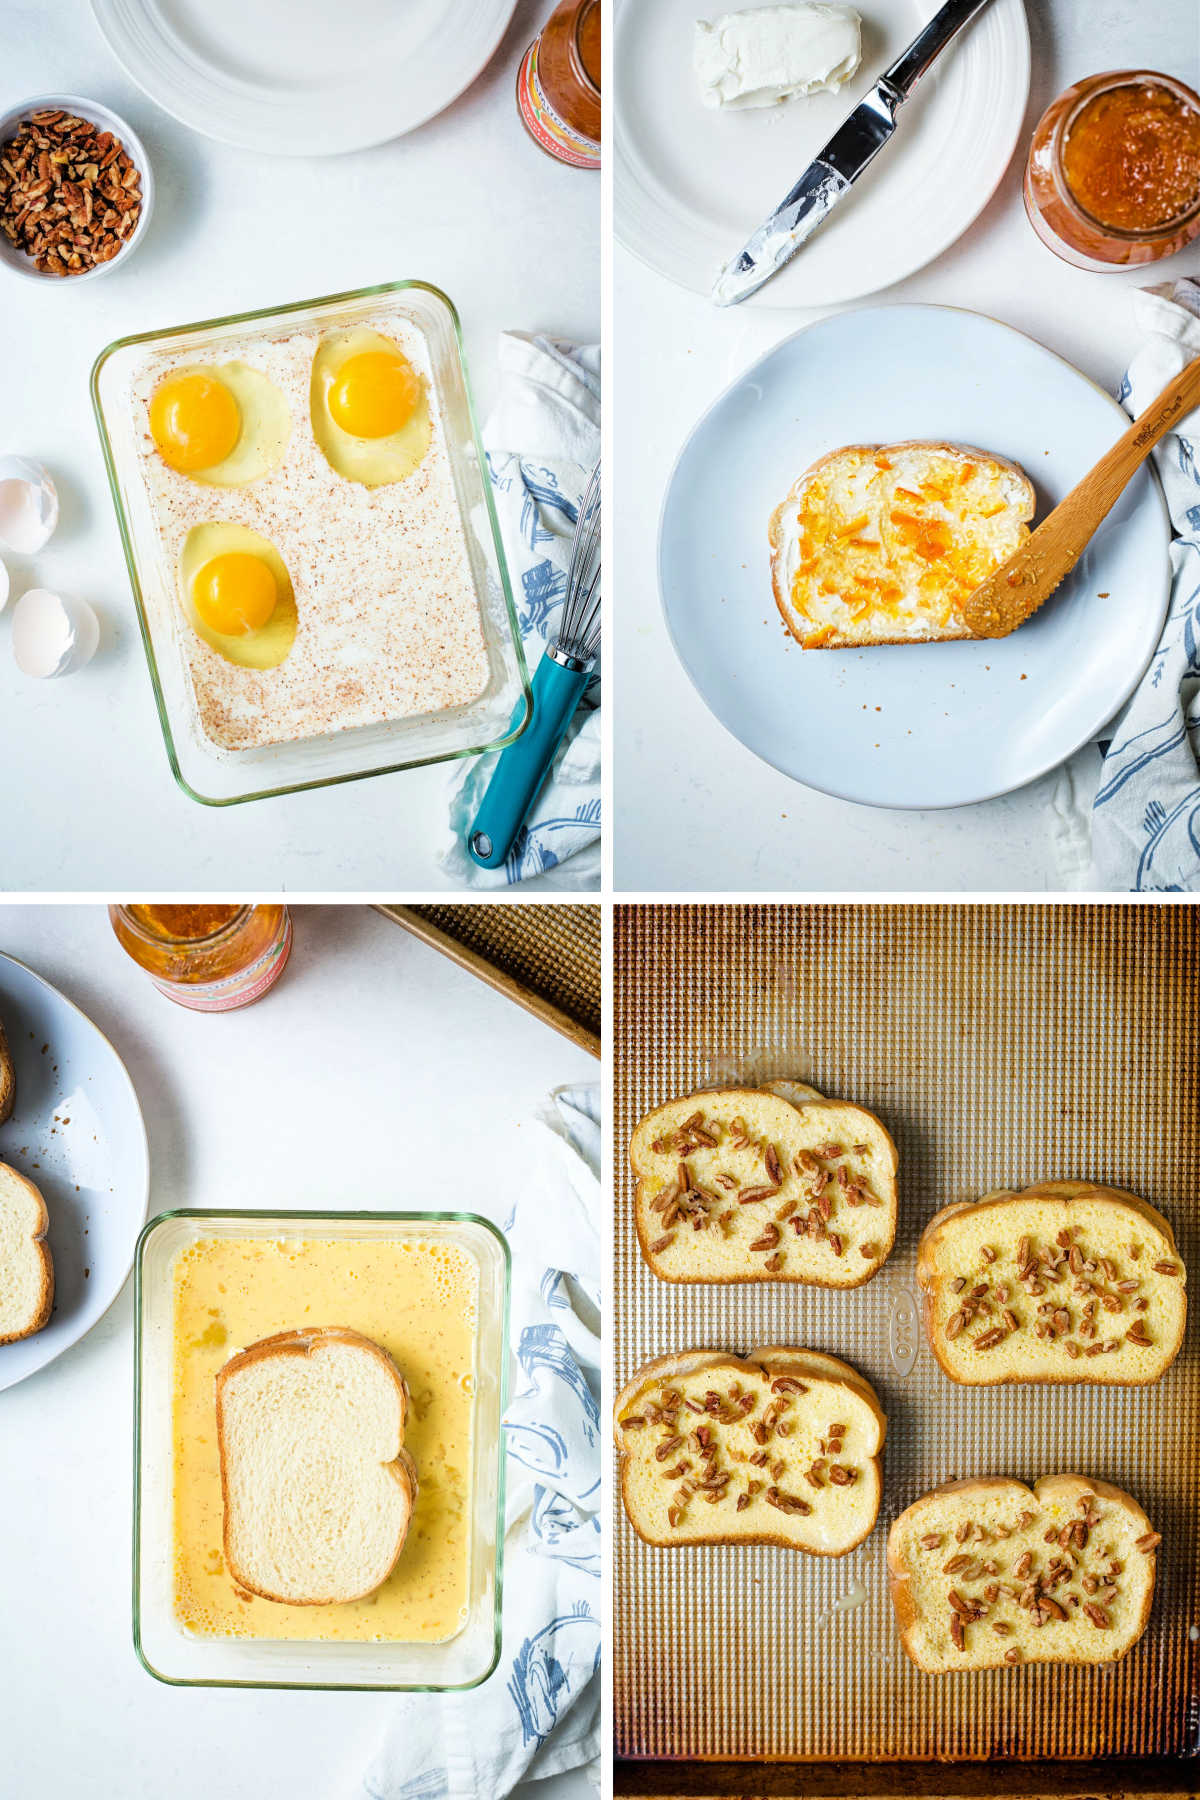 process steps for making orange french toast: whisk together eggs, milk, and vanilla; spread bread slices with cream cheese and orange marmalade; dip in egg mixture; place on baking sheet.